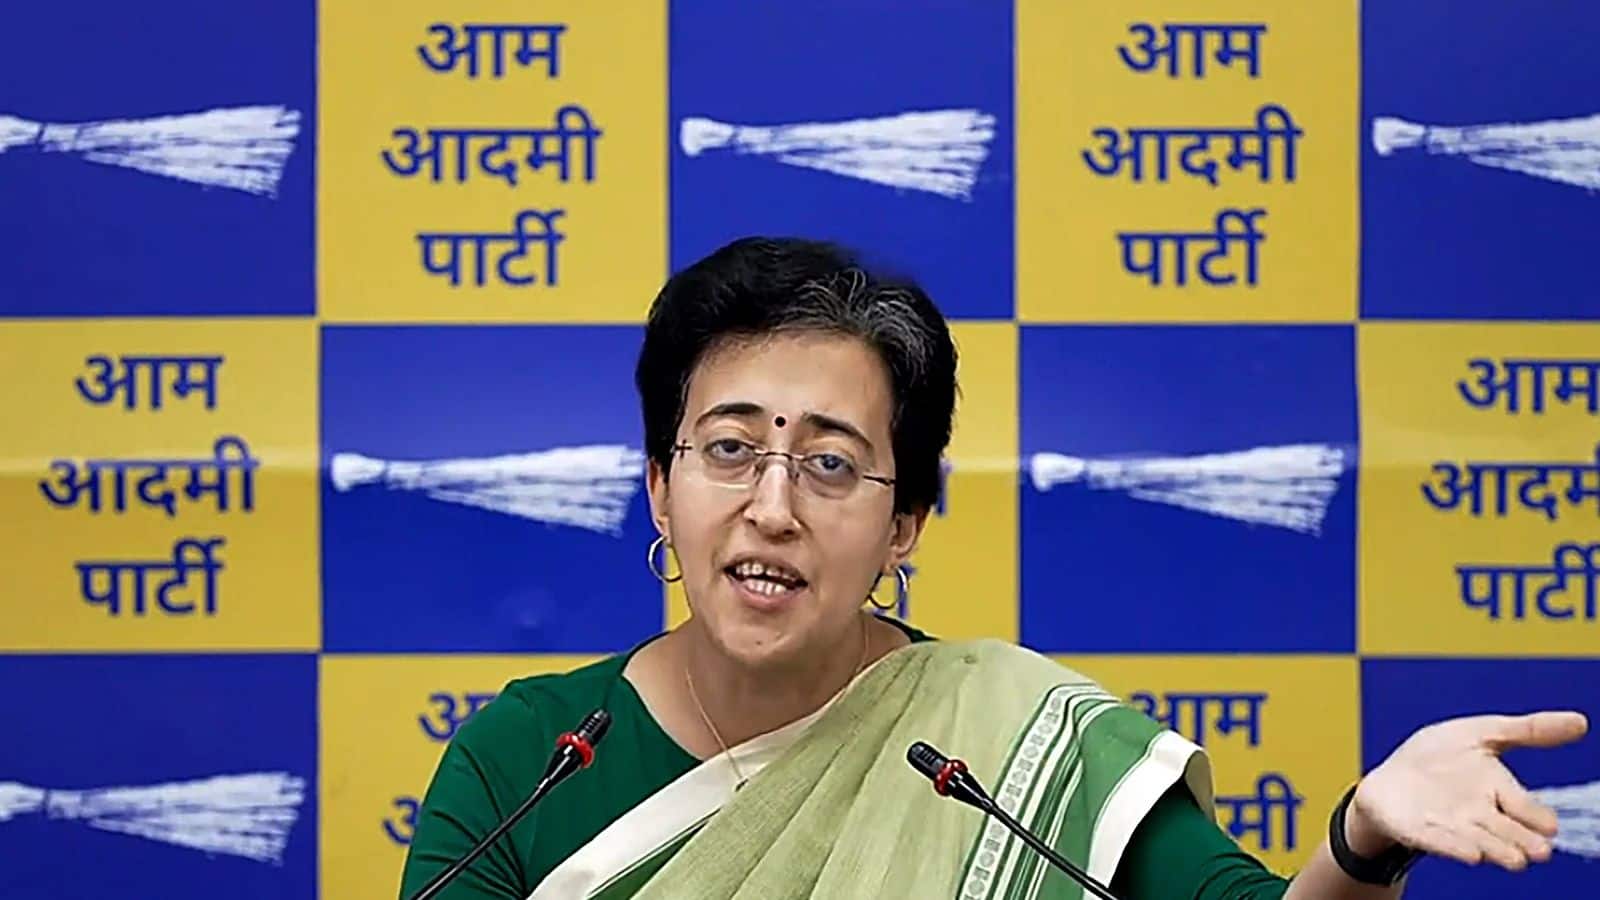 BJP sues Atishi for 'BJP approached me' claim